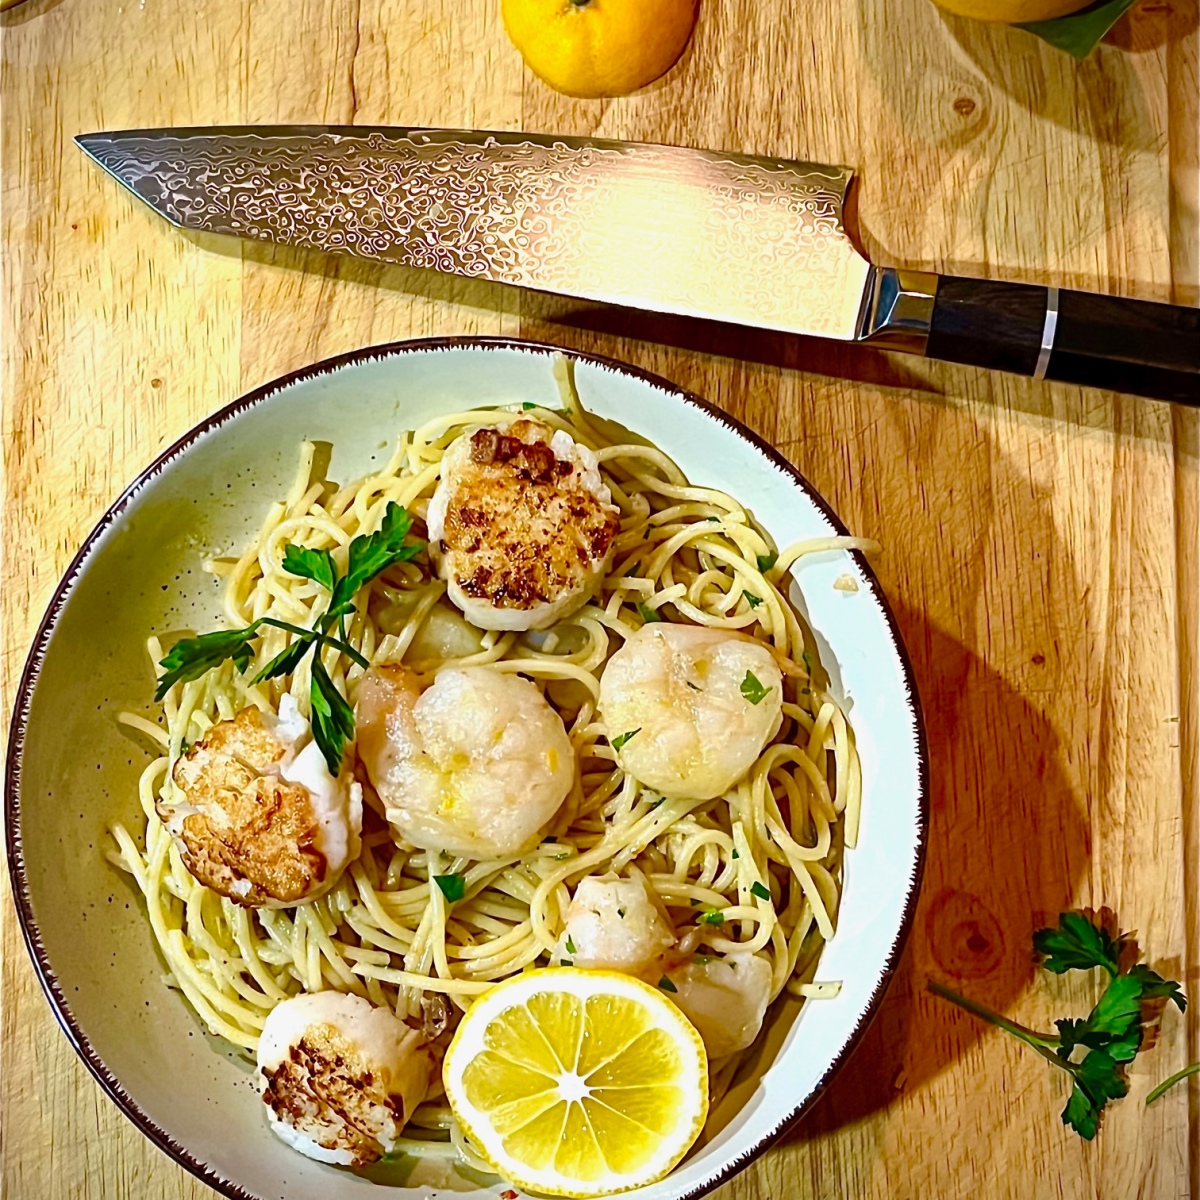 Seafood Pasta with Scallops and Gulf Shrimp